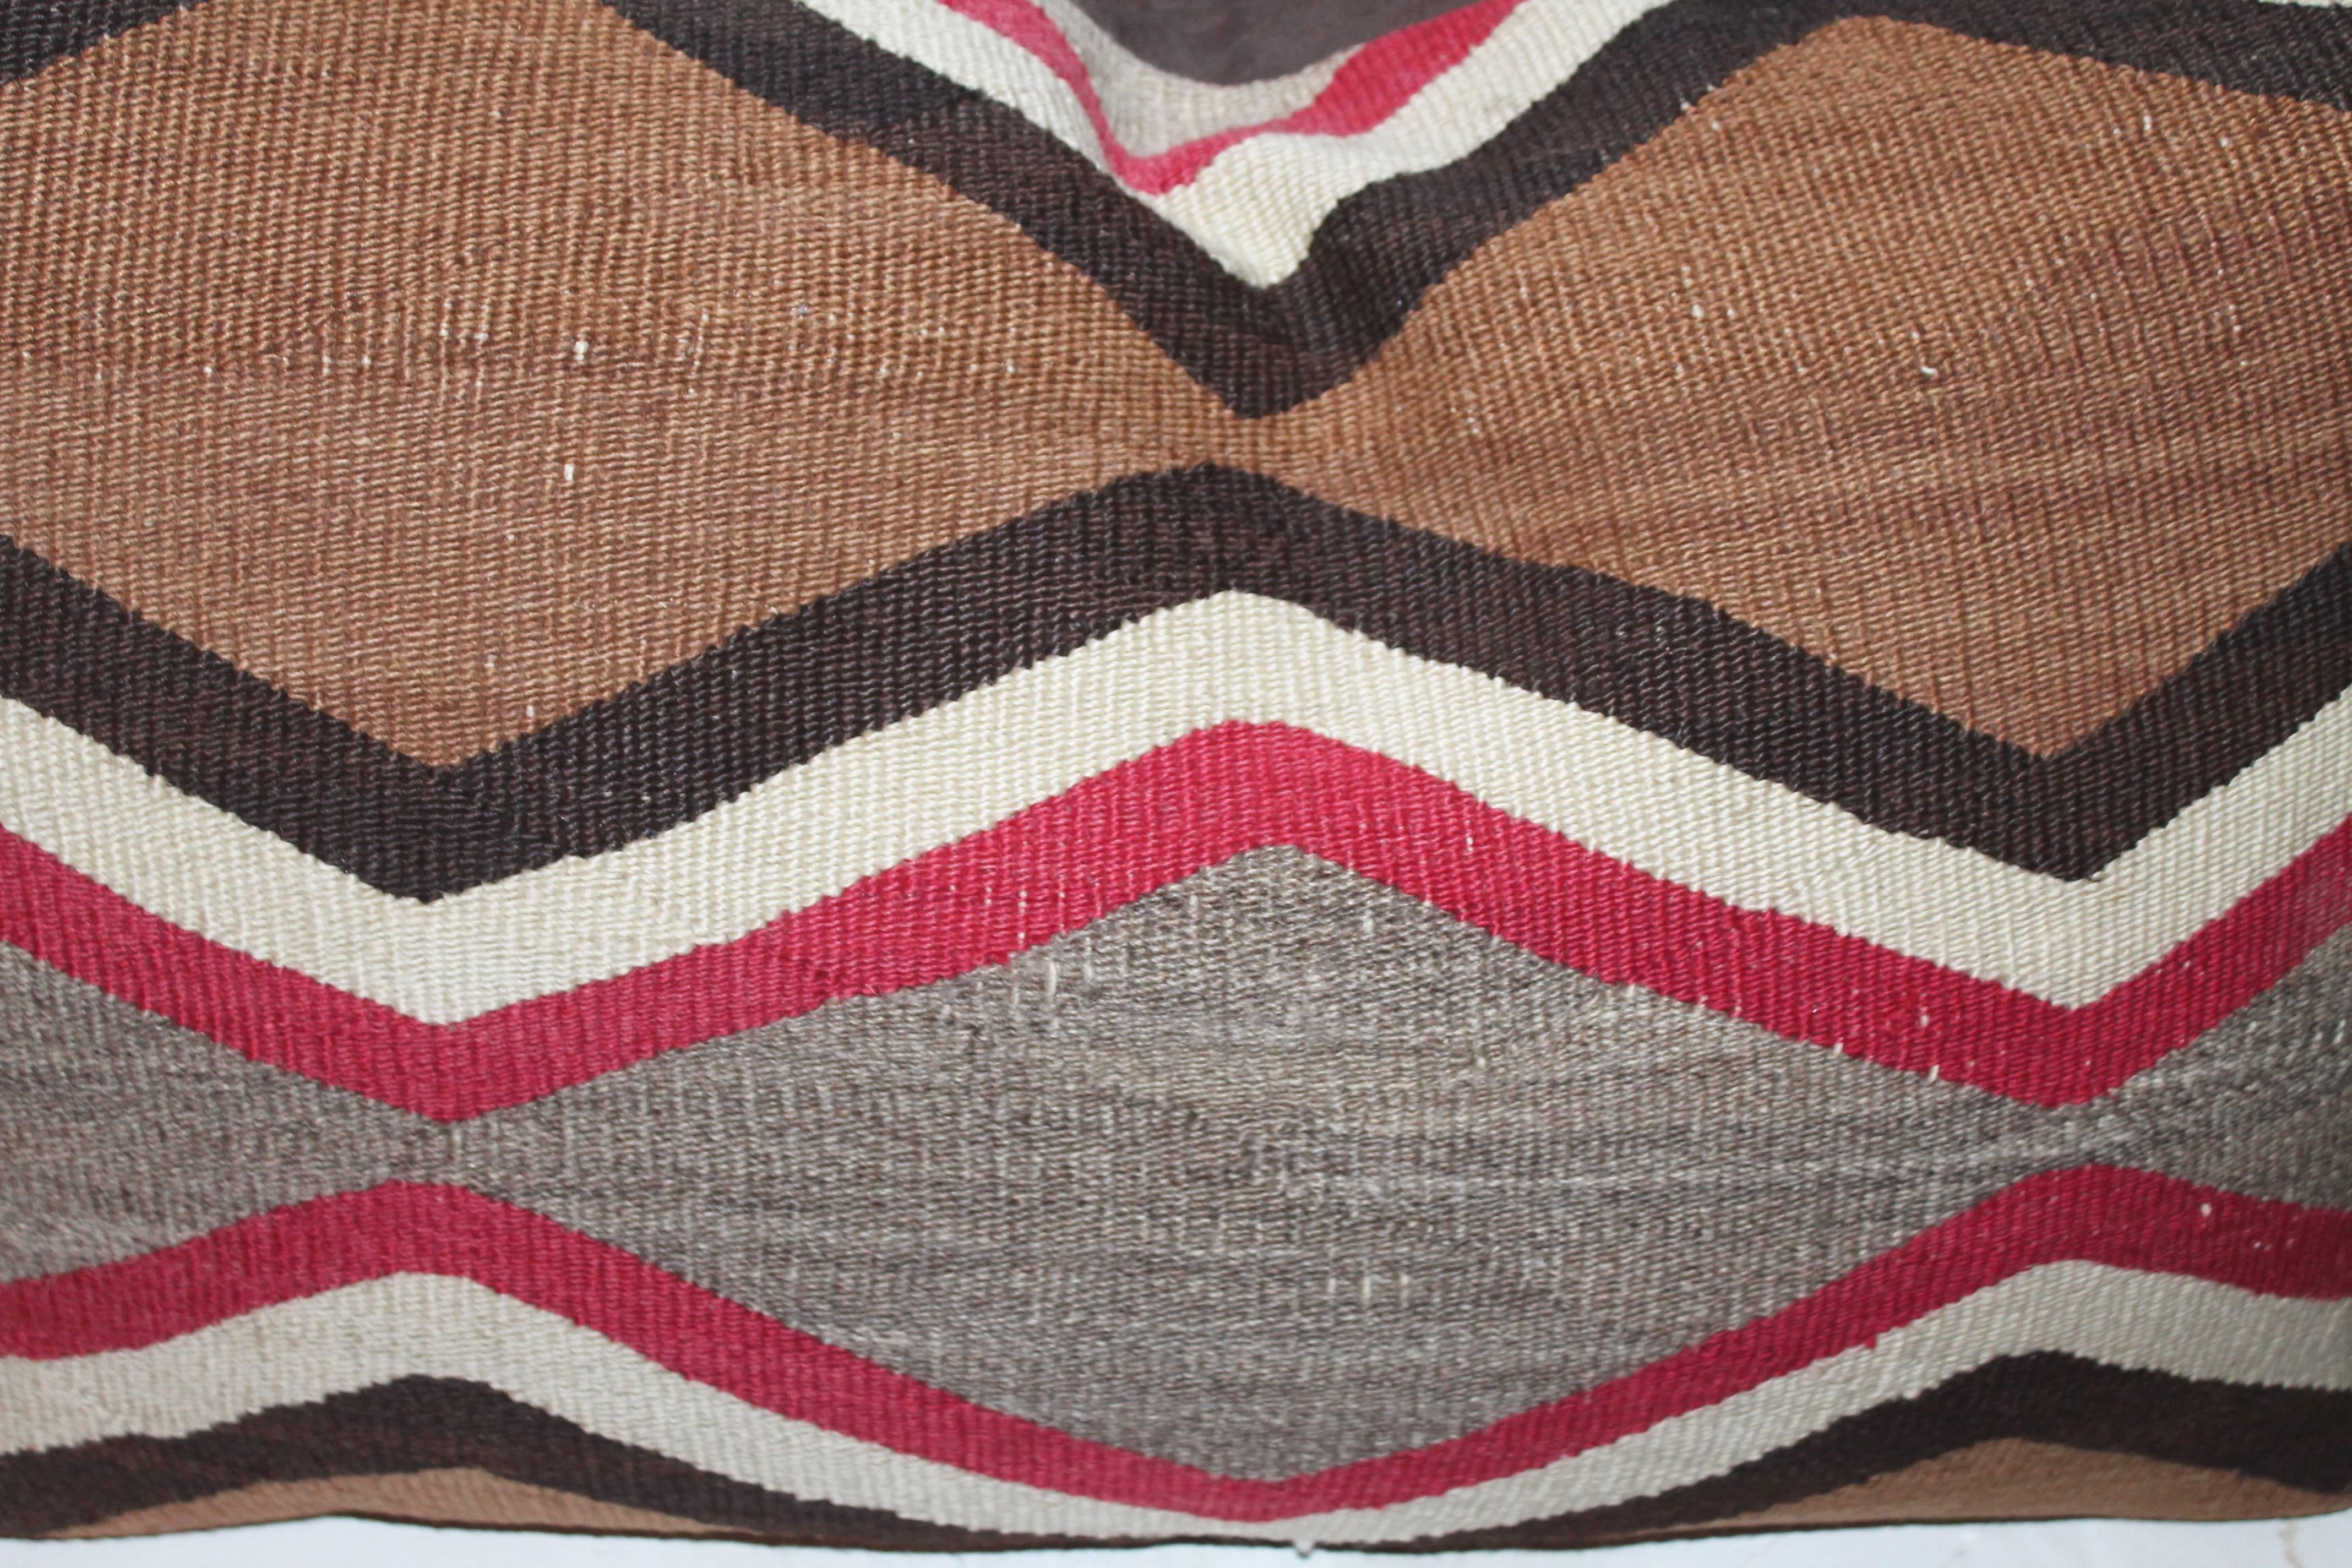 This pair of early large bolster pillows from an early Navajo 19th century transitional saddle blanket. The backing is in brown cotton linen. These are amazing and quite a rare weaving.